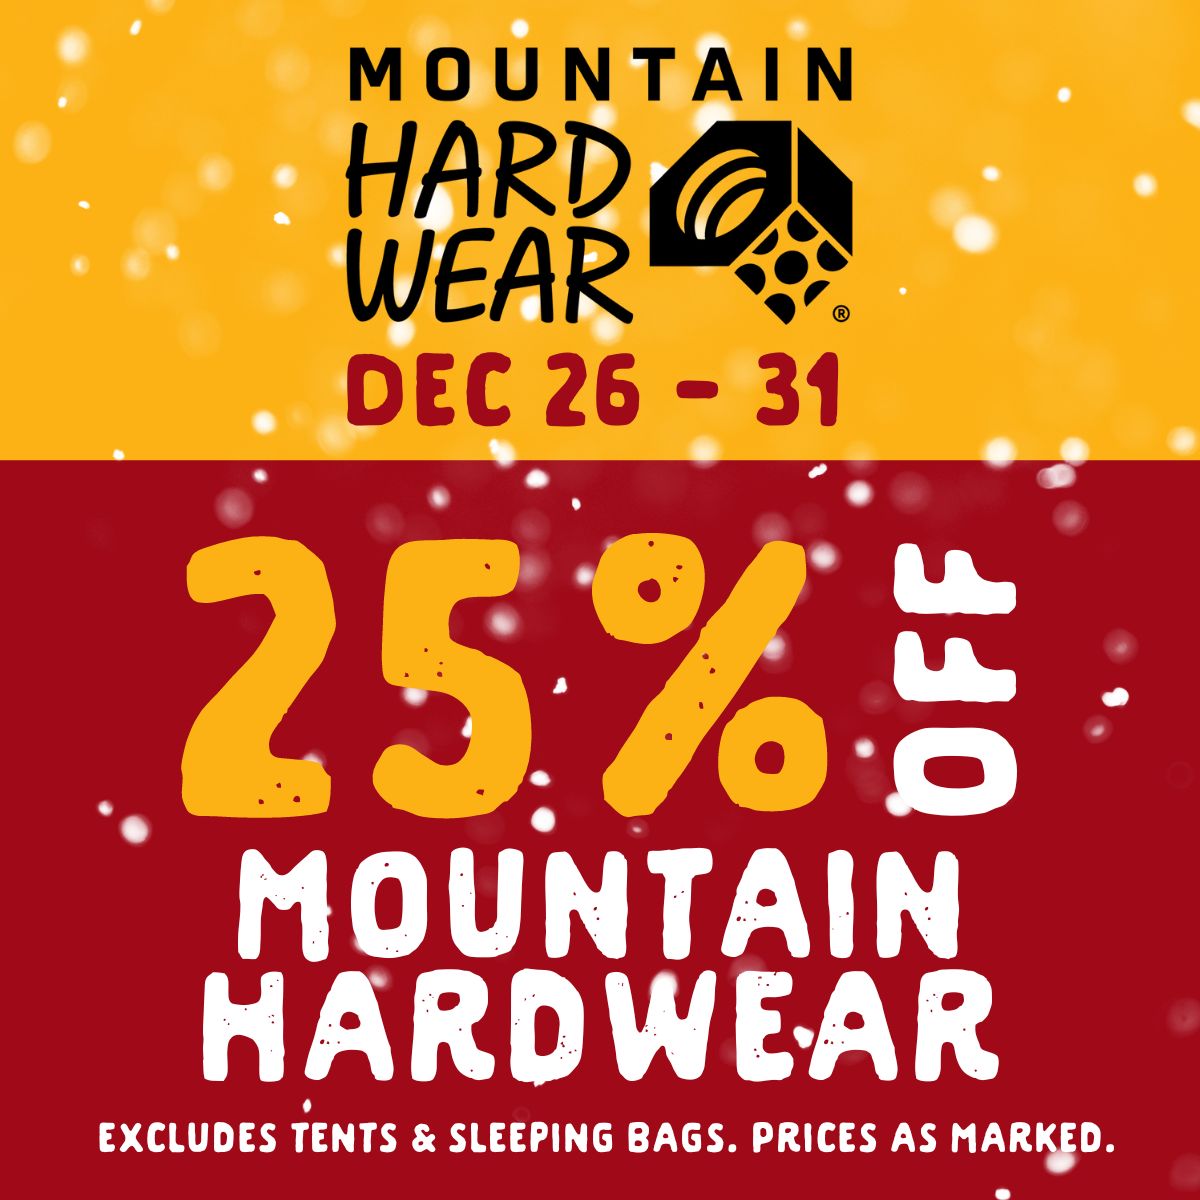 25% off Mountain Hardwear from December 26 to 31. Excludes tents & sleeping bags. Prices as marked.